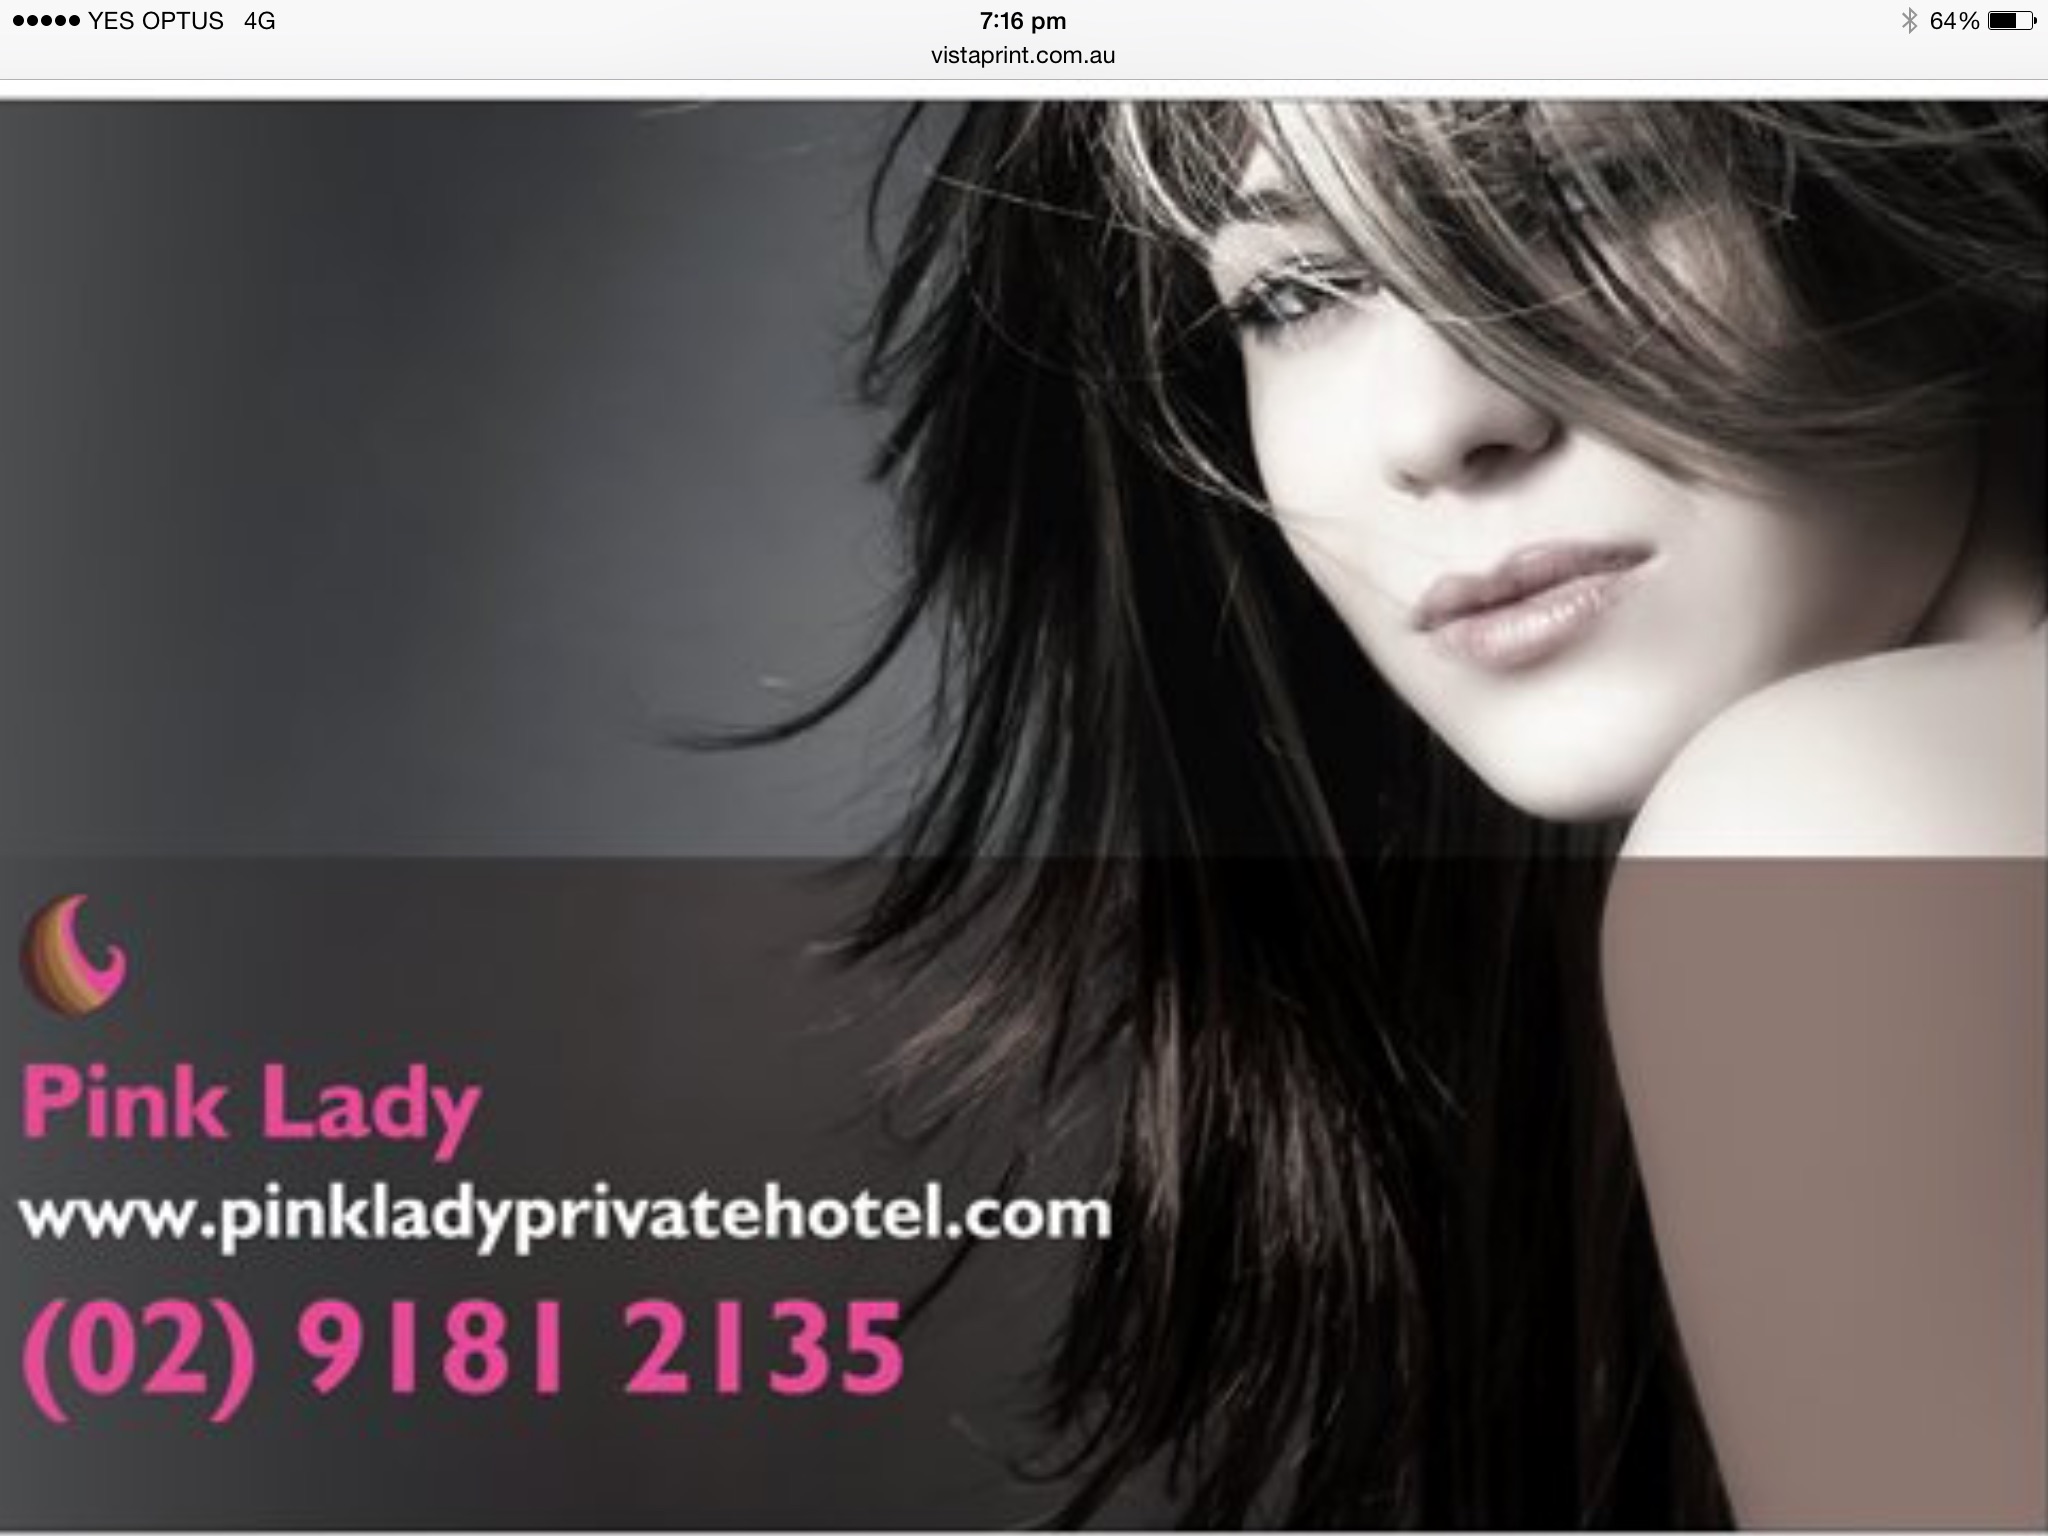 Pink Lady Private Hotel - Accommodation Adelaide